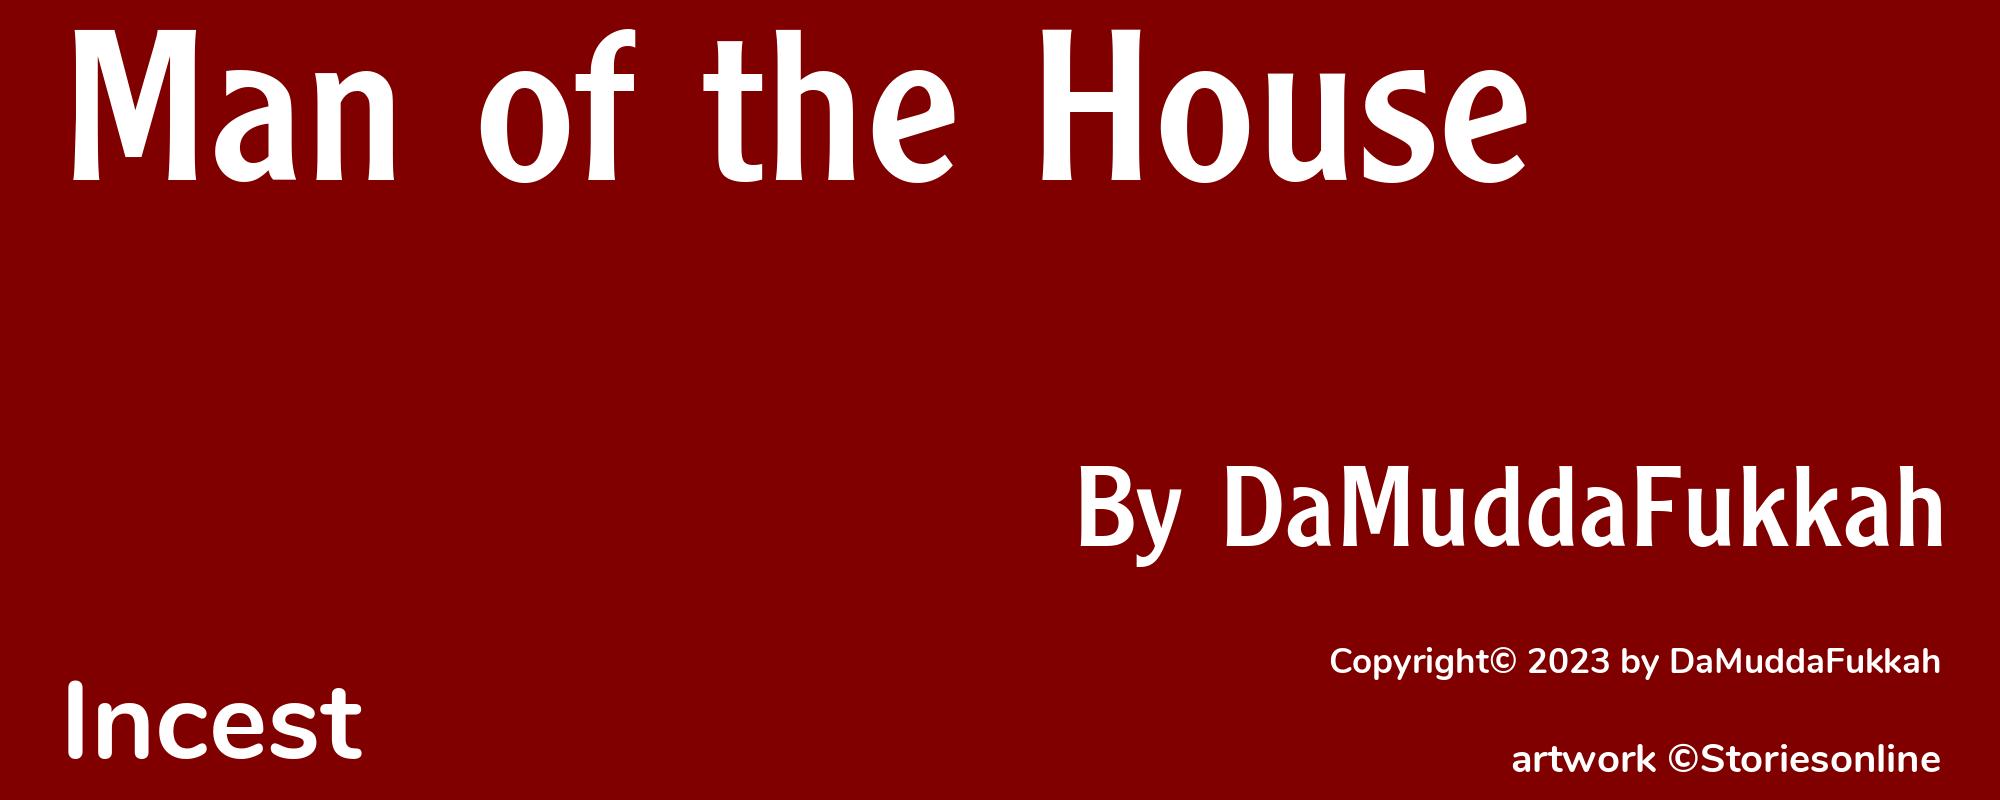 Man of the House - Cover